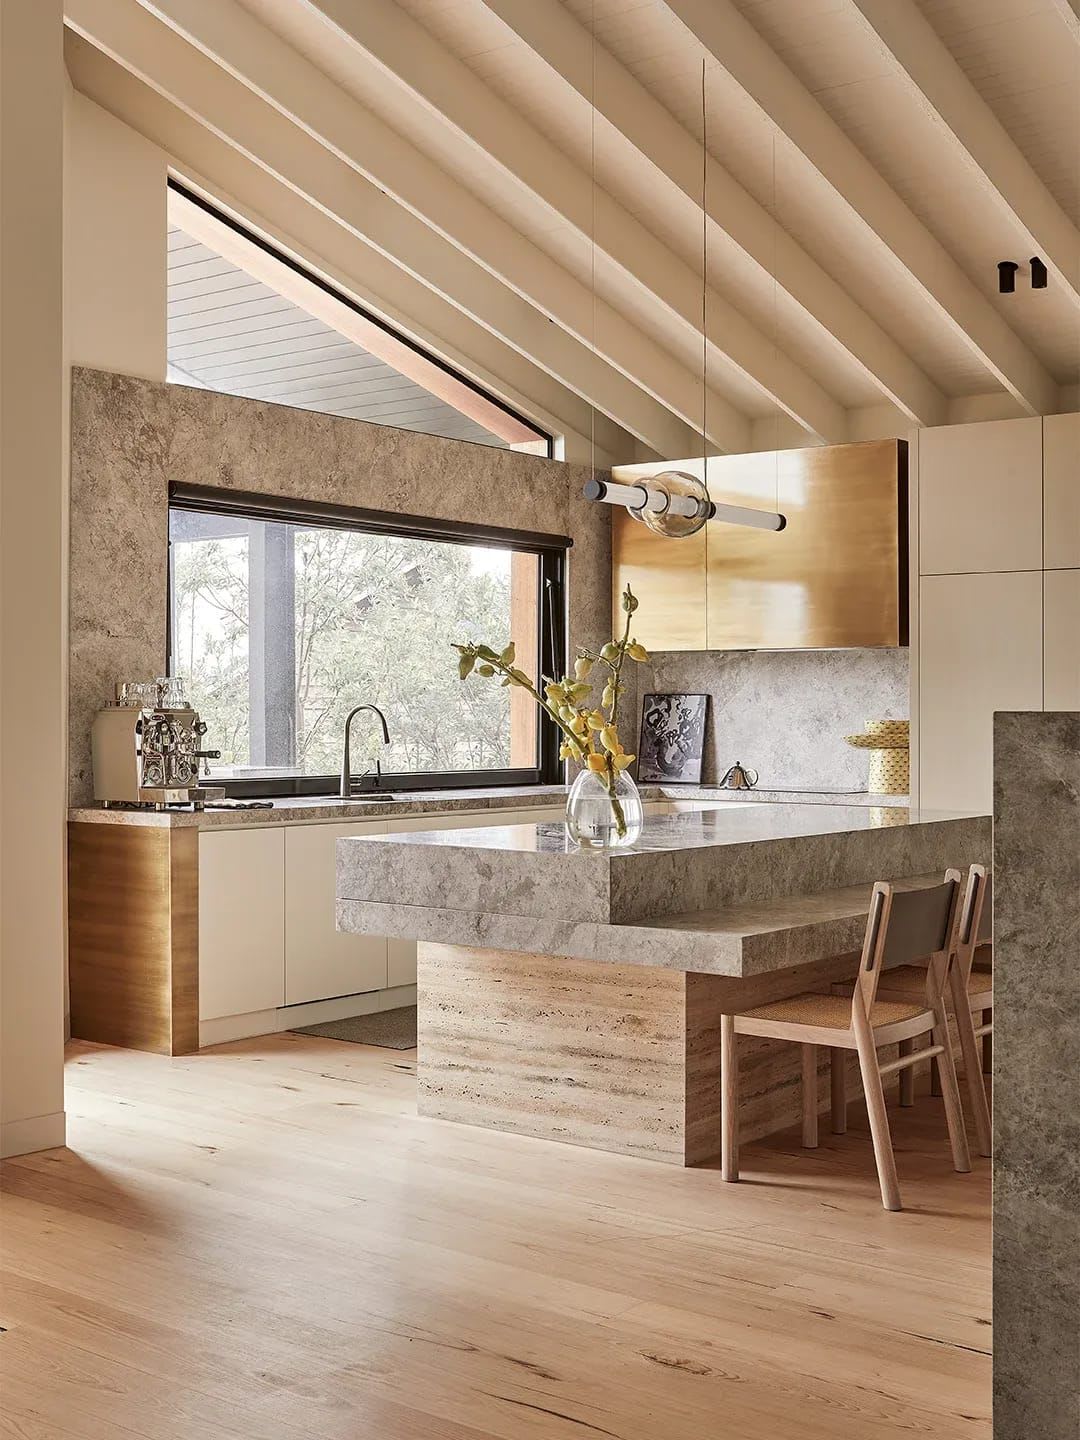 The Limestone-Travertine Kitchen Island in This Beach House Makes a Case for Unexpected Combos